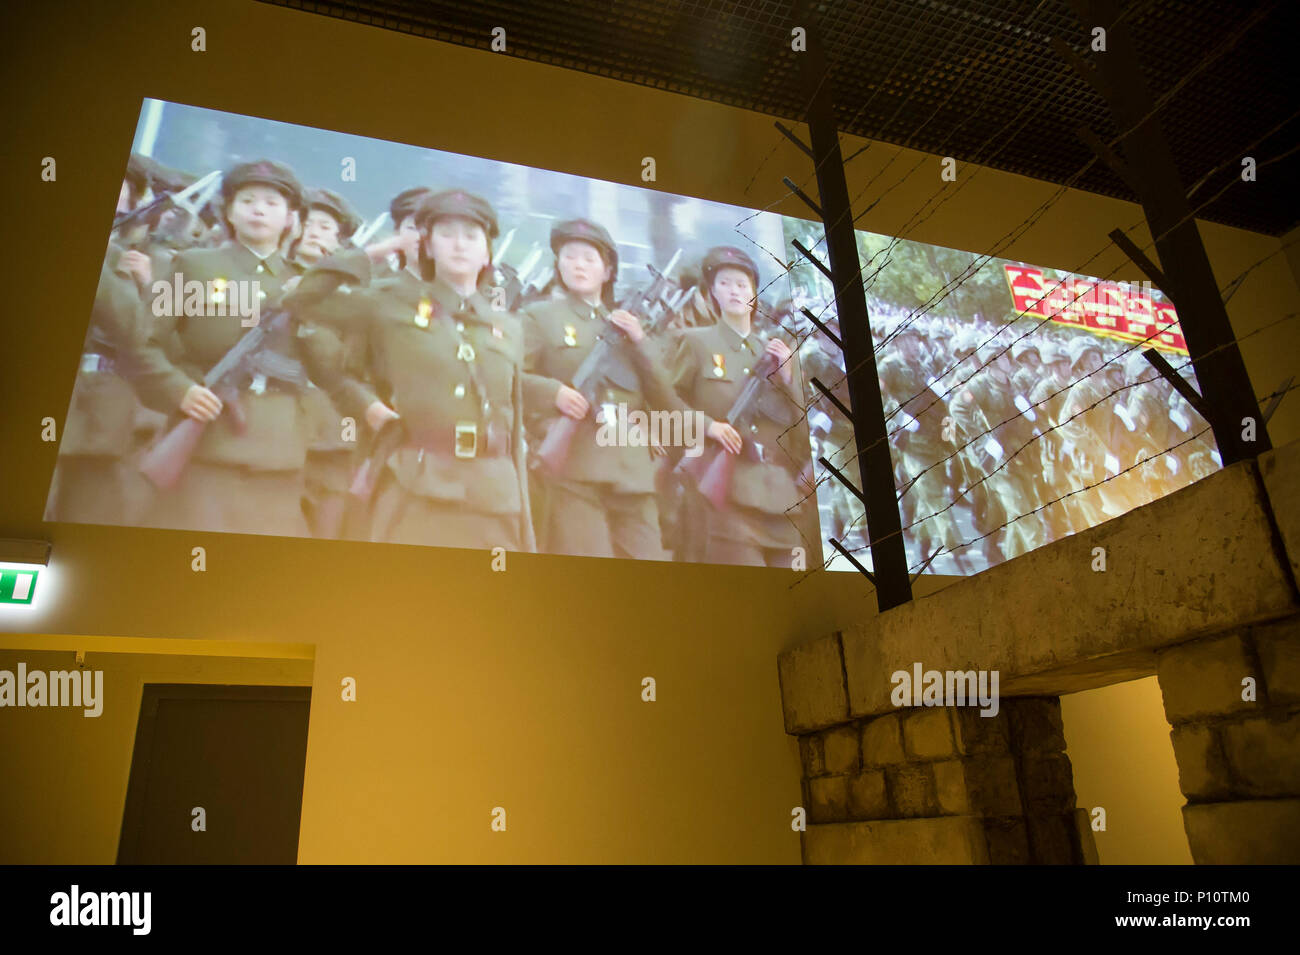 North Korea women soldiers as a part of exhibion in Museum of the Second World War in Gdansk, Poland. January 28th 2017 © Wojciech Strozyk / Alamy Sto Stock Photo